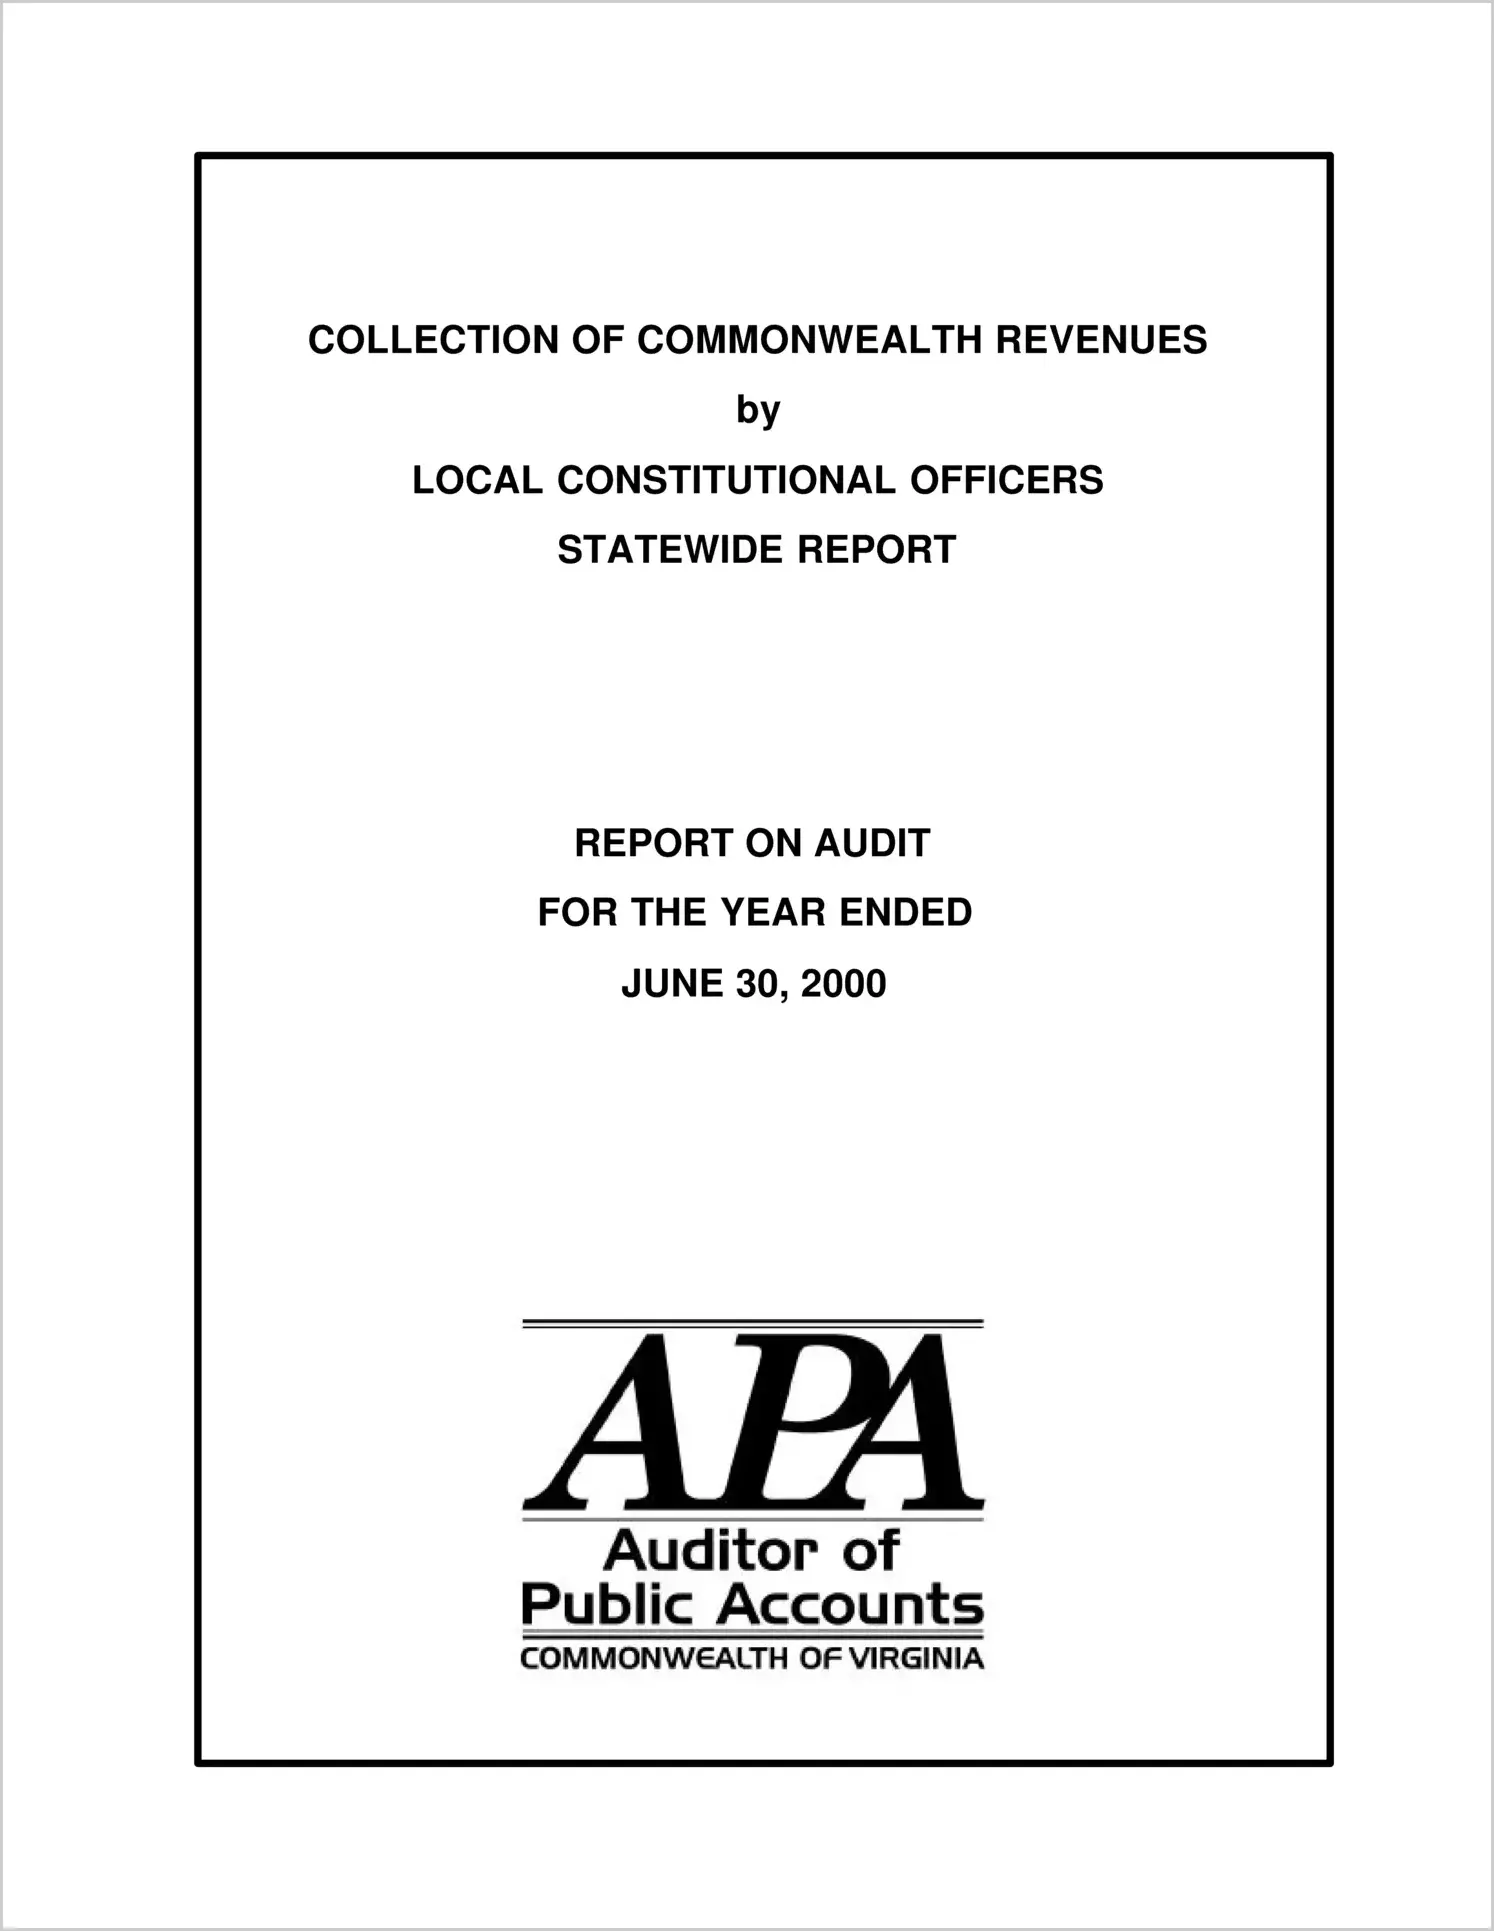 Collection of Commonwealth Revenues by Local Constitutional Officers Statewide Report for the year ended June 30, 2000